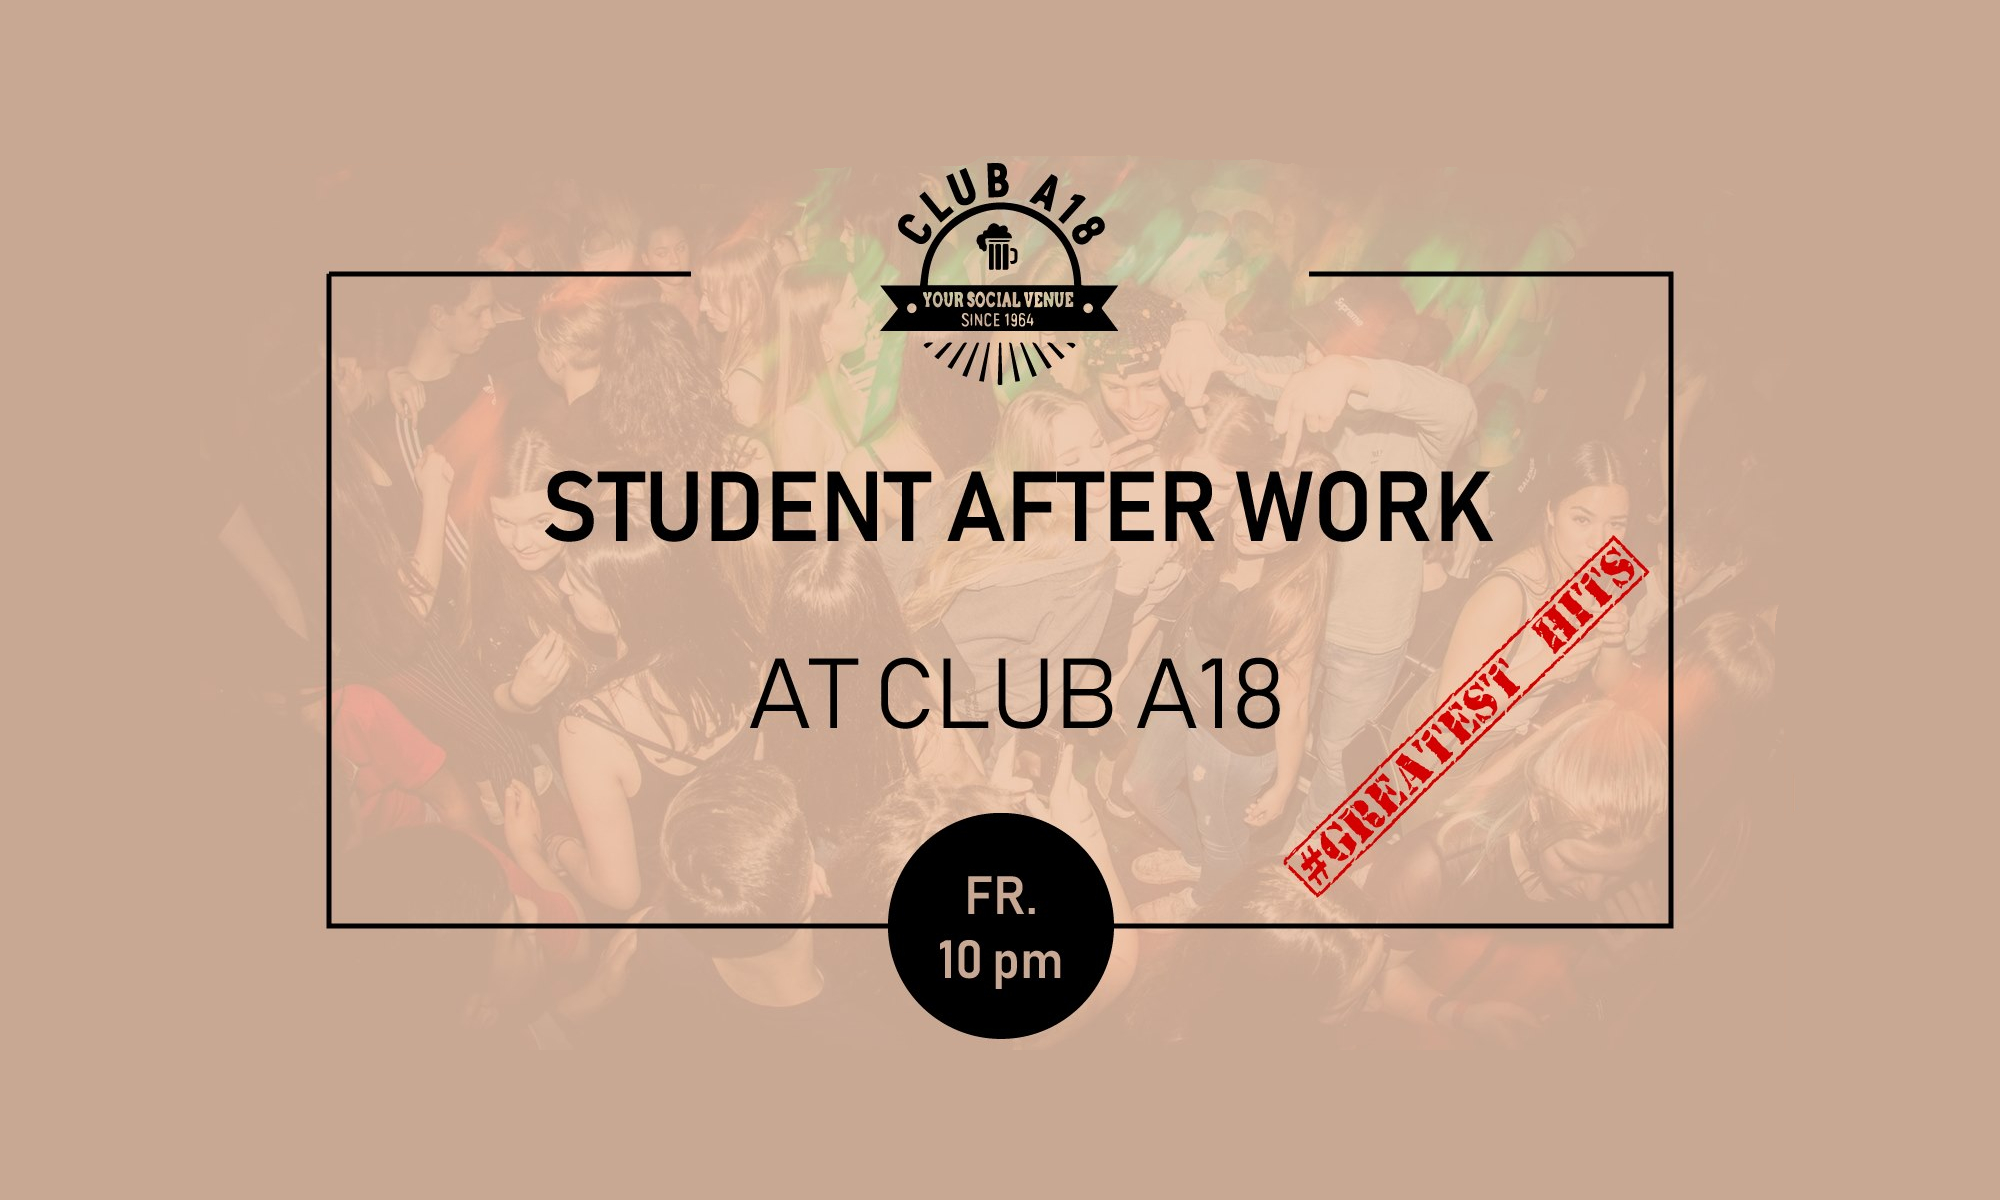 Students After Work Party